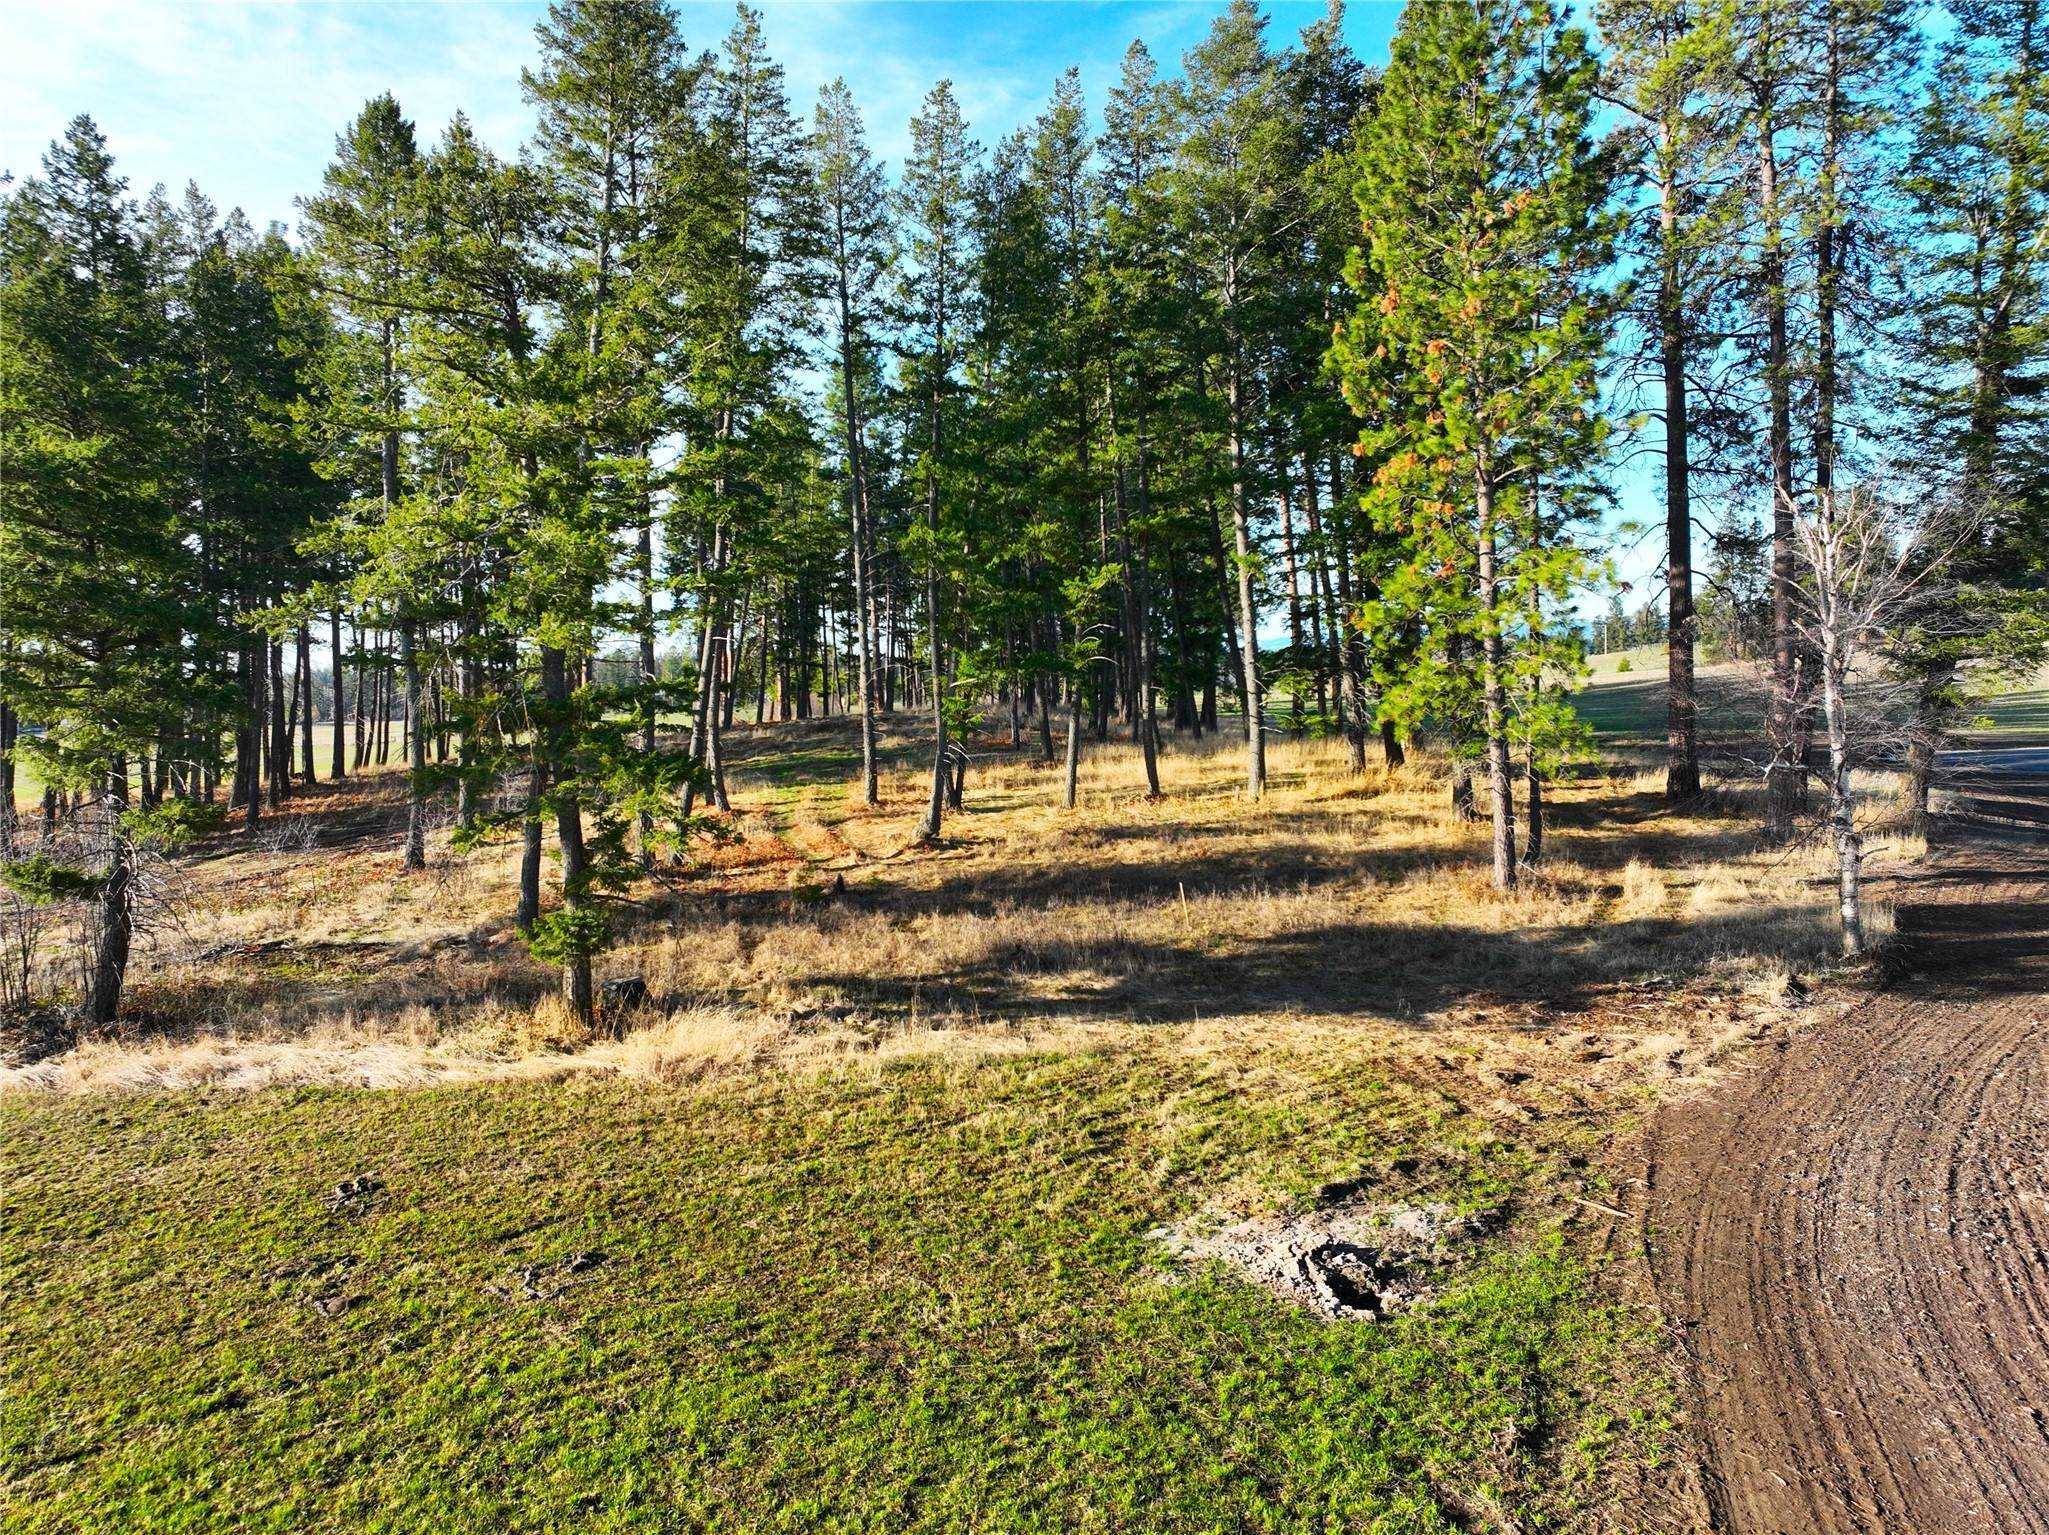 12. Land for Sale at Lot 7 Patriots Lane, Columbia Falls, Montana 59912 United States